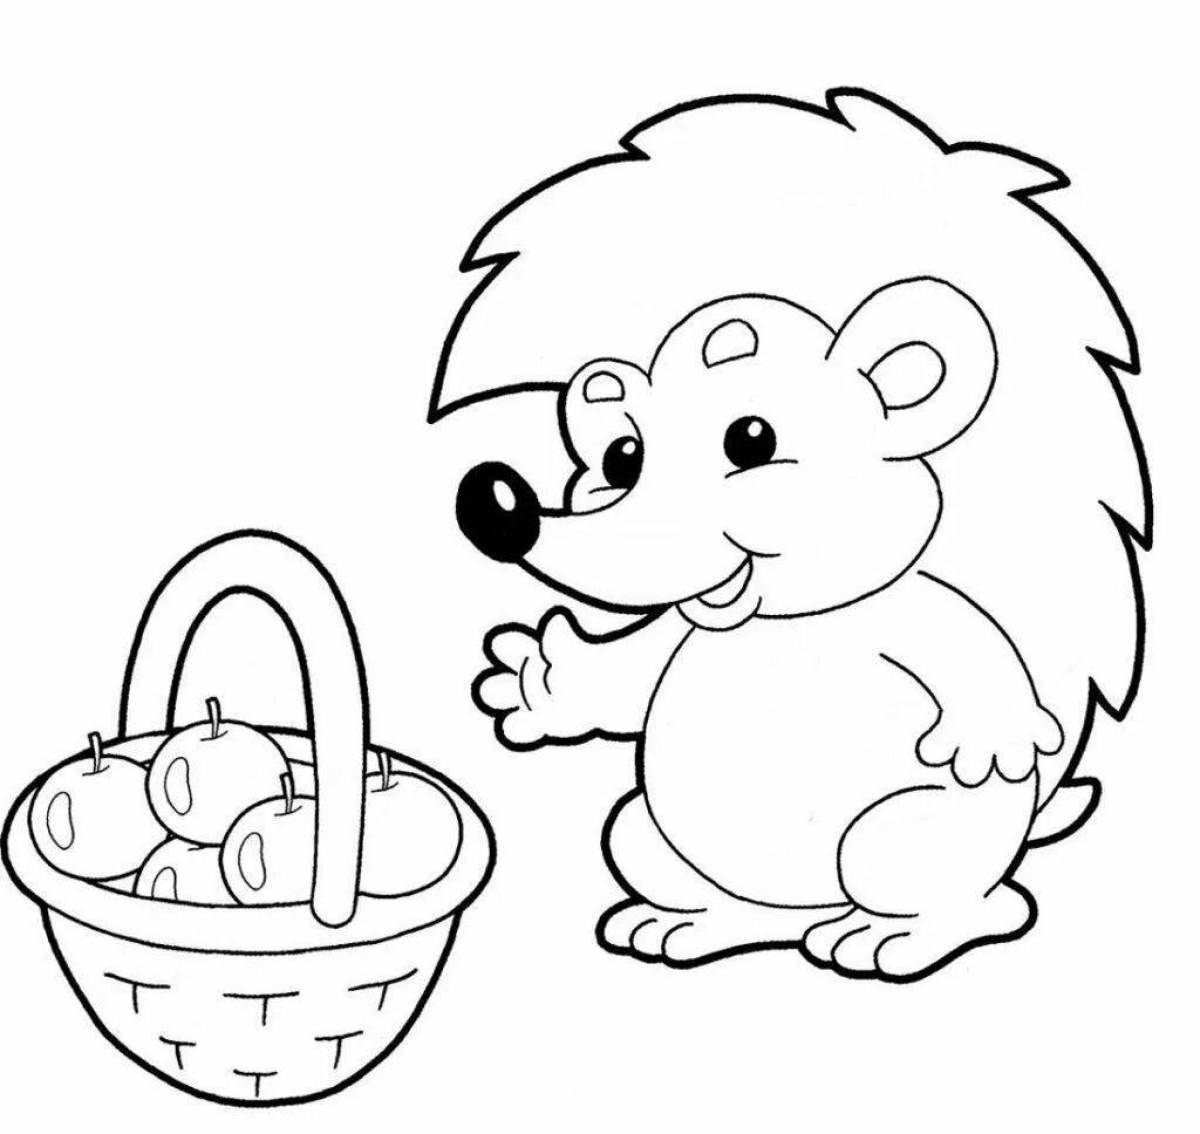 Coloring pages for kids for kids #12